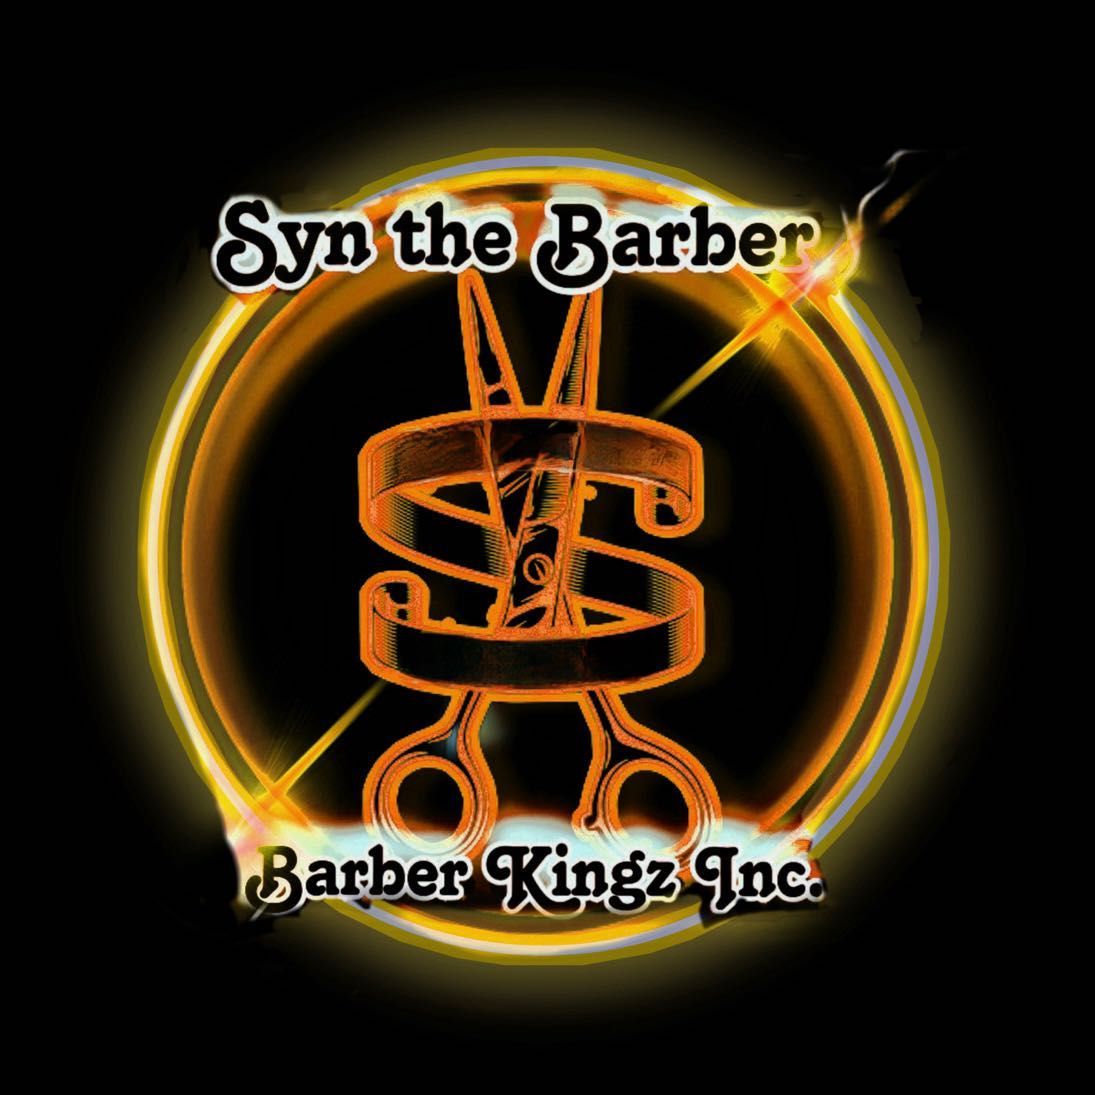 SynTheBarber, 366 Lincoln Hwy, North Versailles, 15137